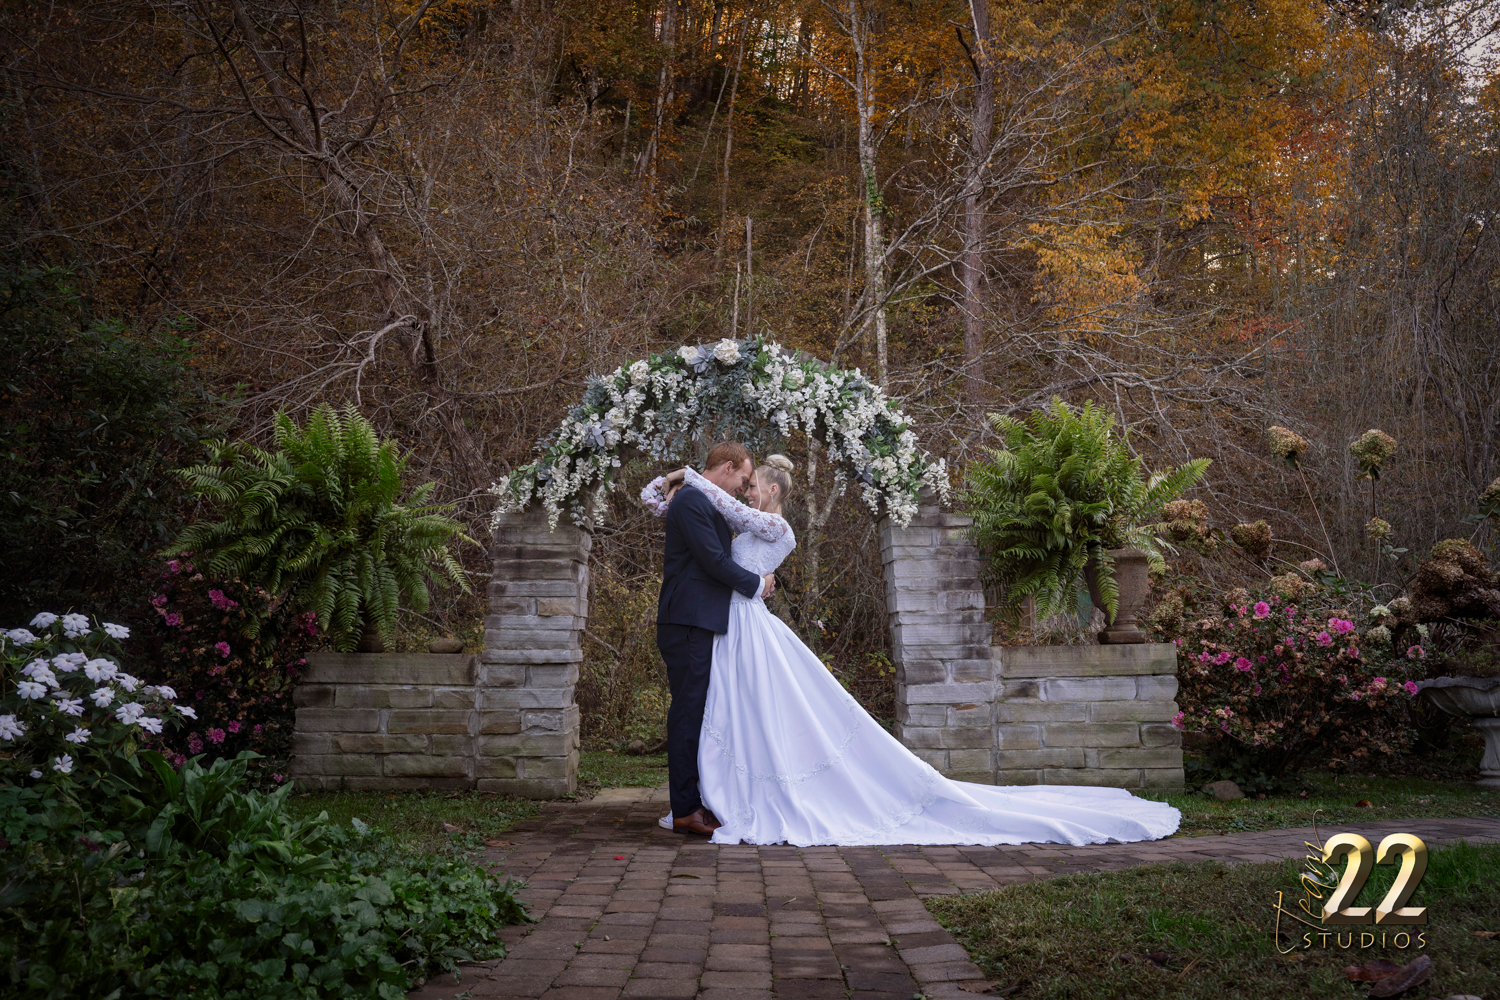 Bride with her arms around her groom at a stone archway with whie flowers in the fall